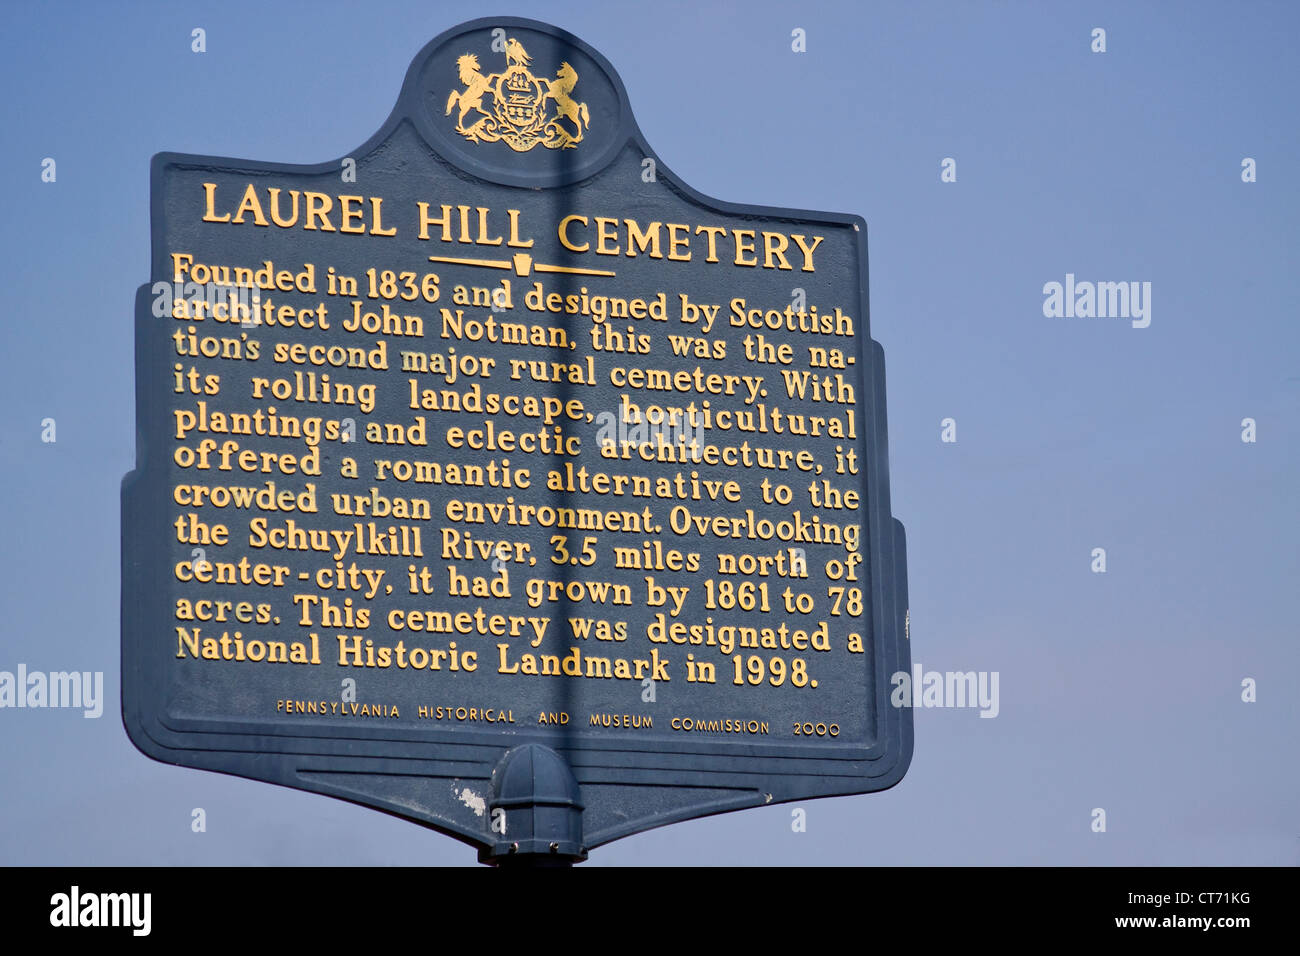 Laurel Hill Cemetery historical landmark and museum commission informational sign along a street in Philadelphia, Pennsylvania. Stock Photo